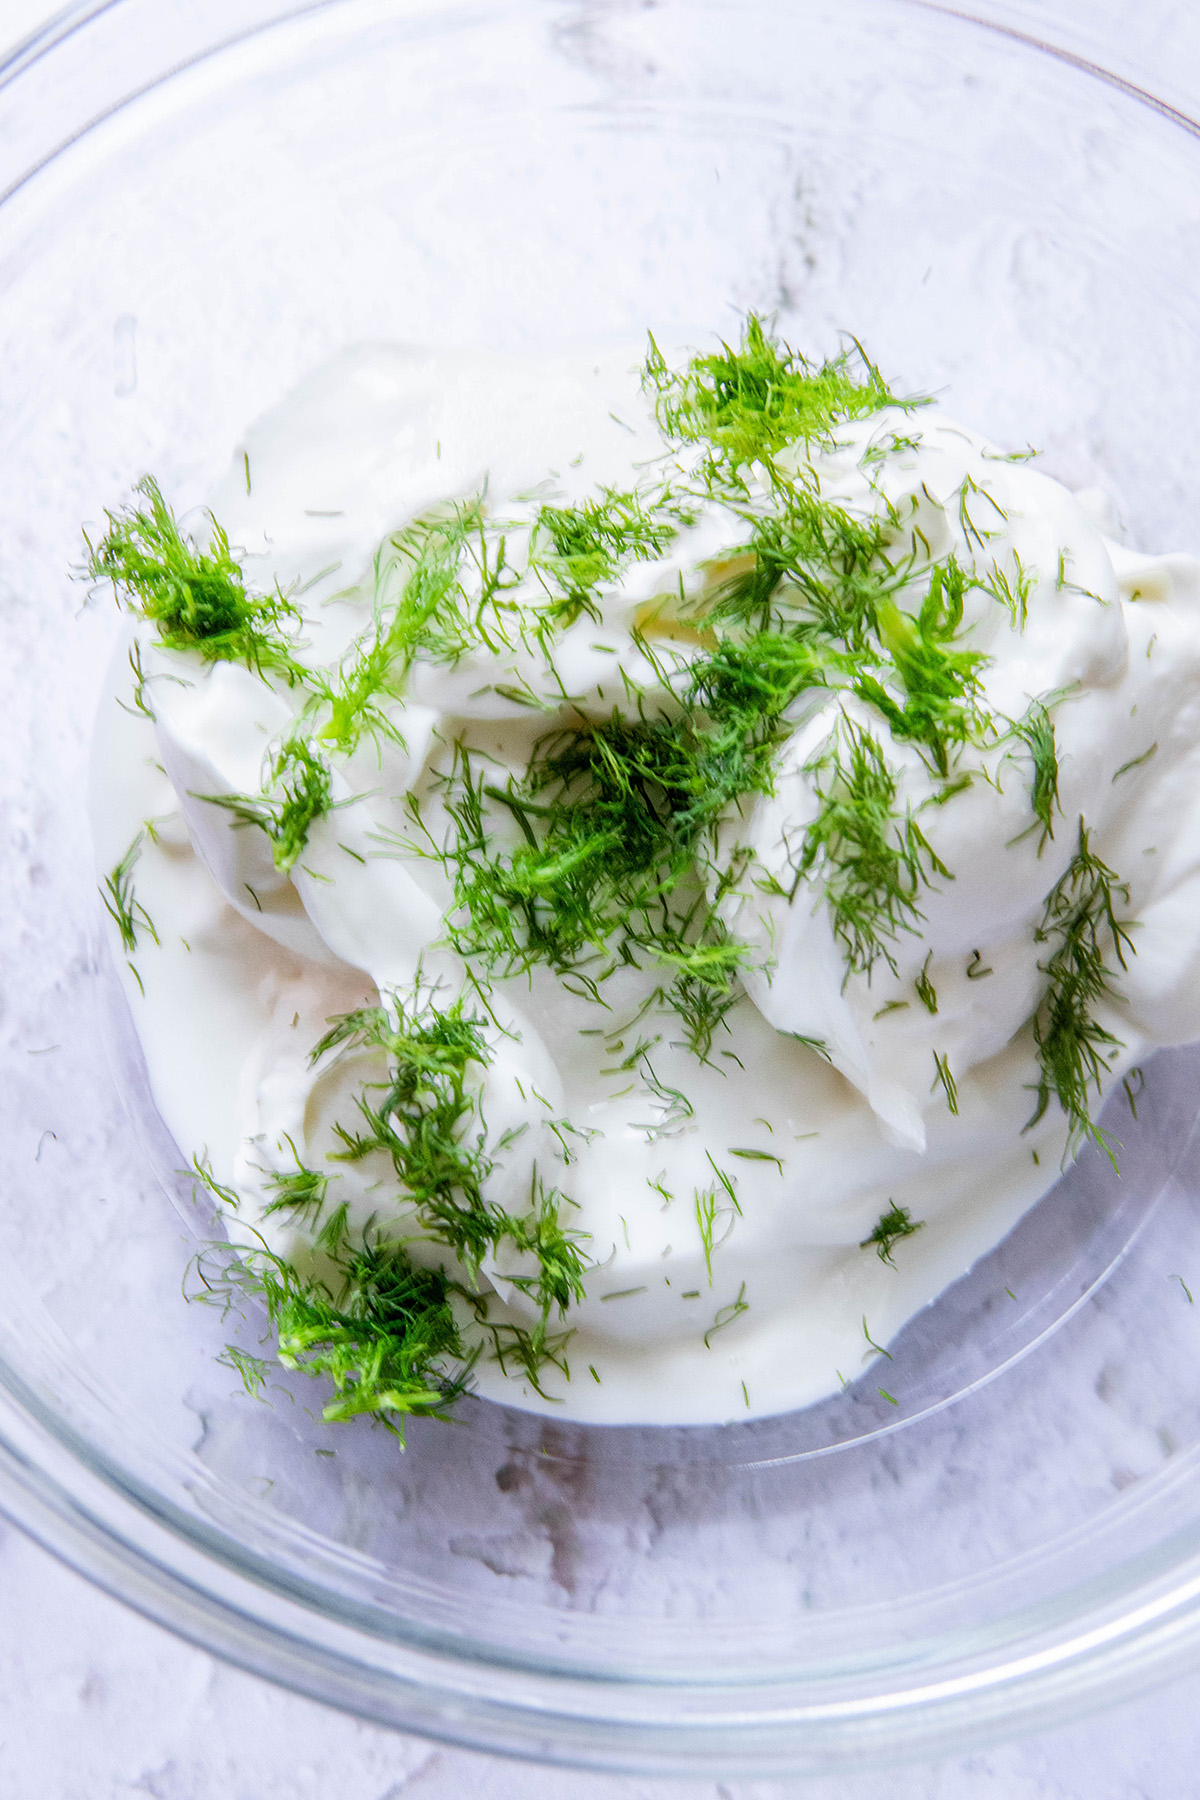 dill and yogurt in a glass bowl